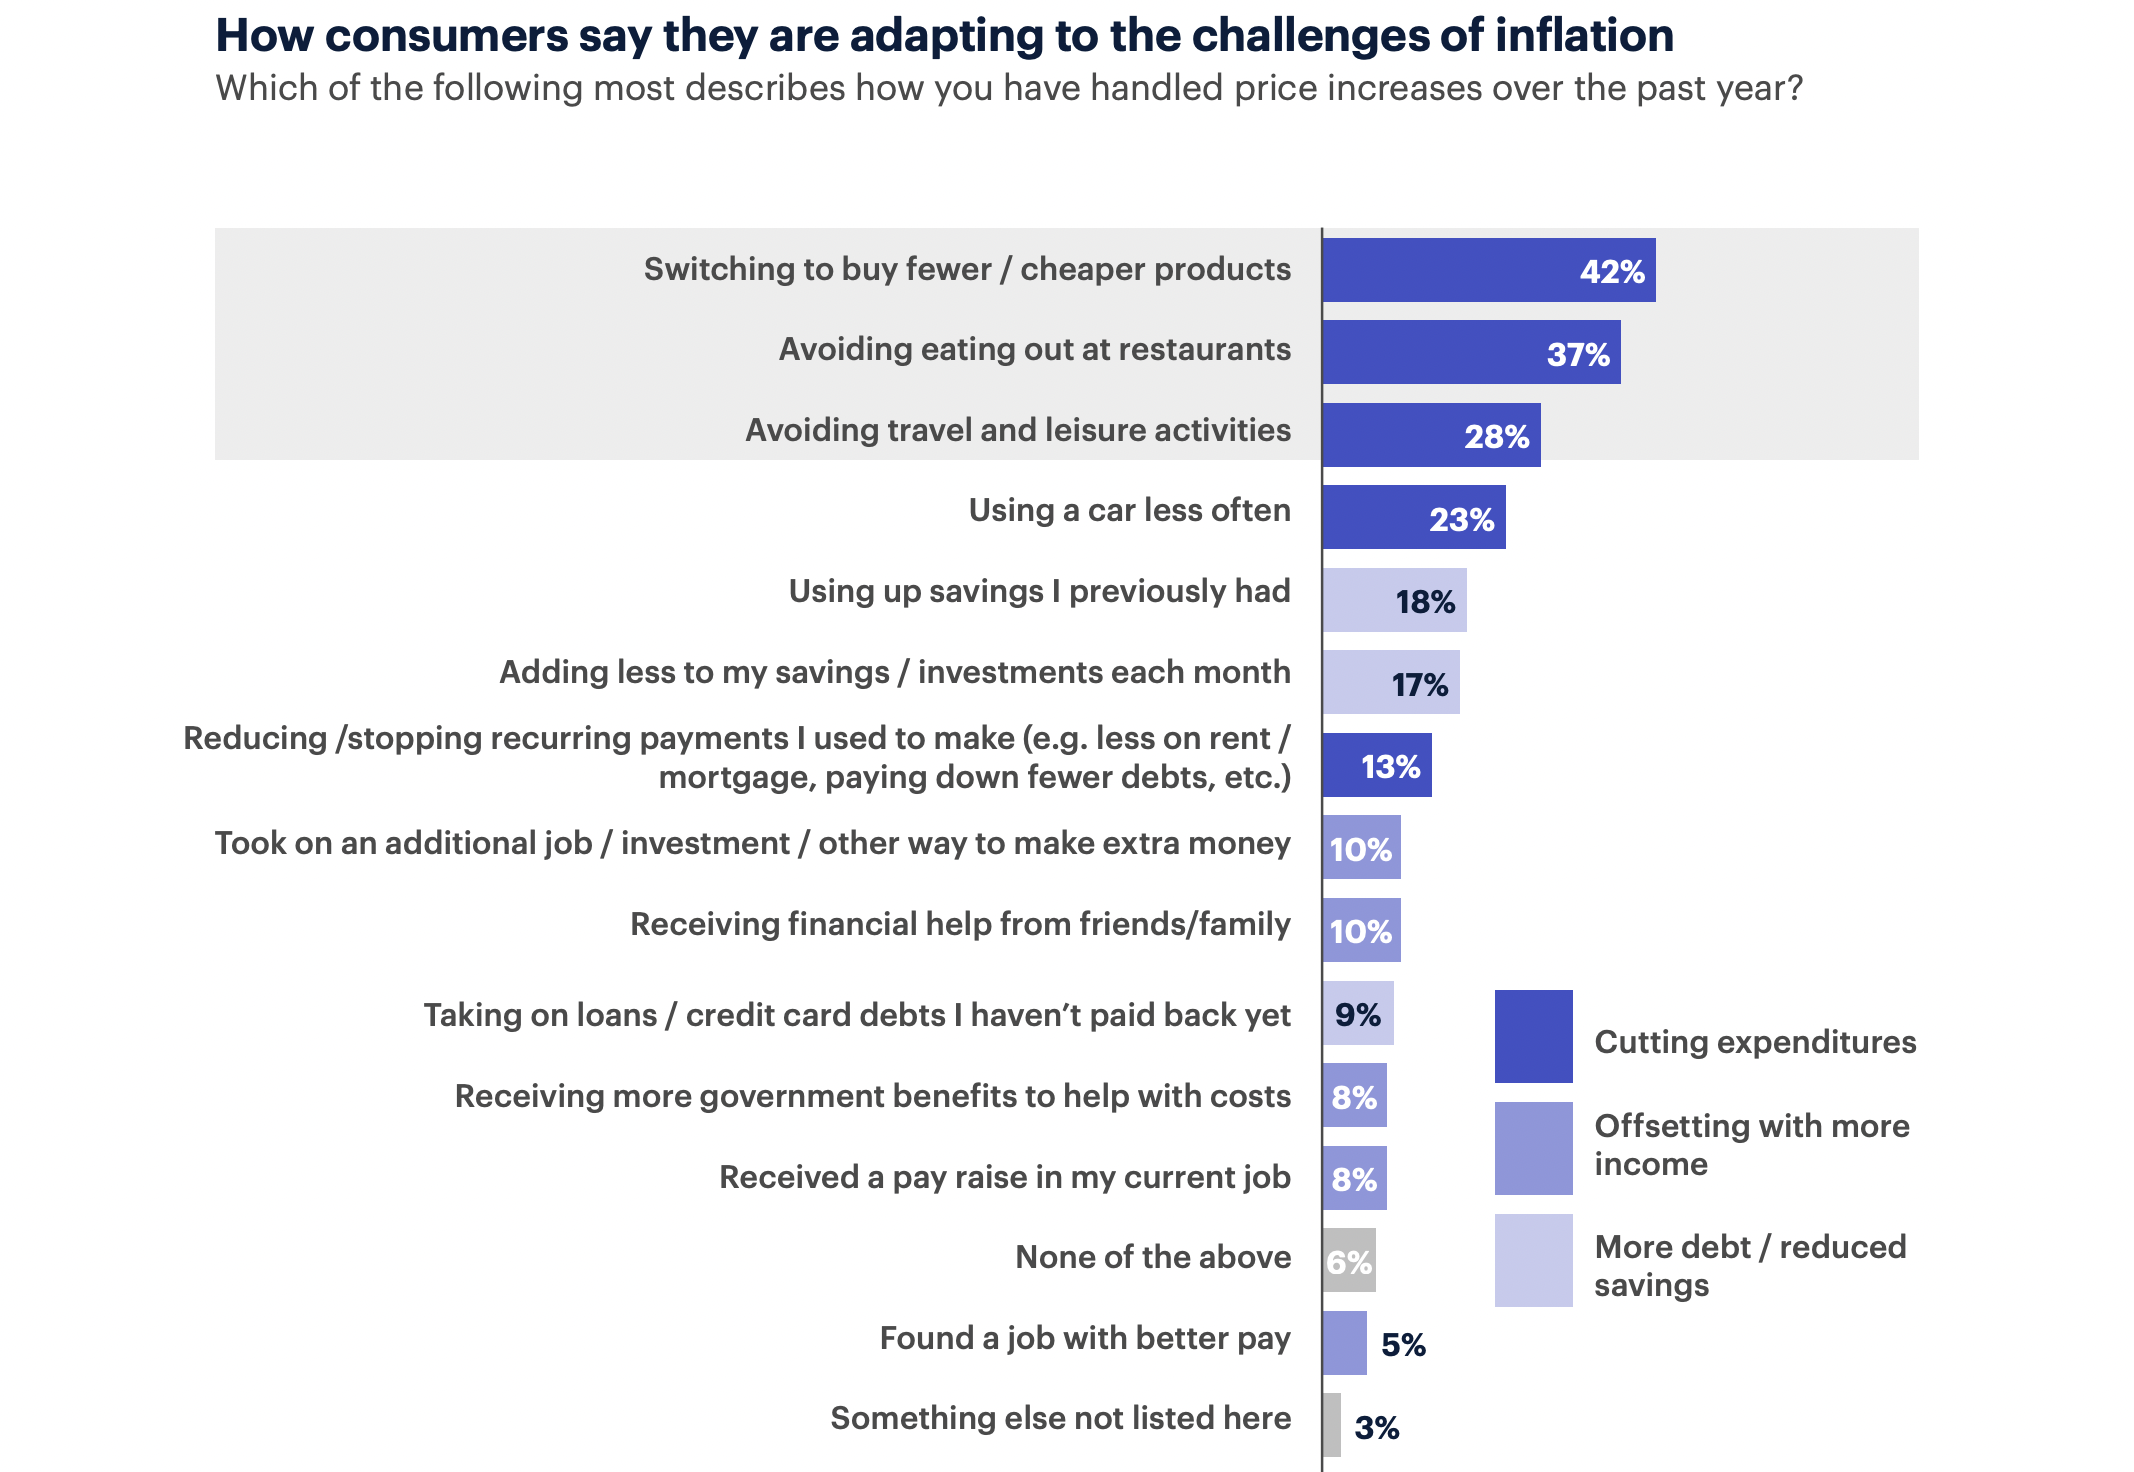 How consumers say they are adapting to inflation; 42% say they are switching to buying few or cheaper products